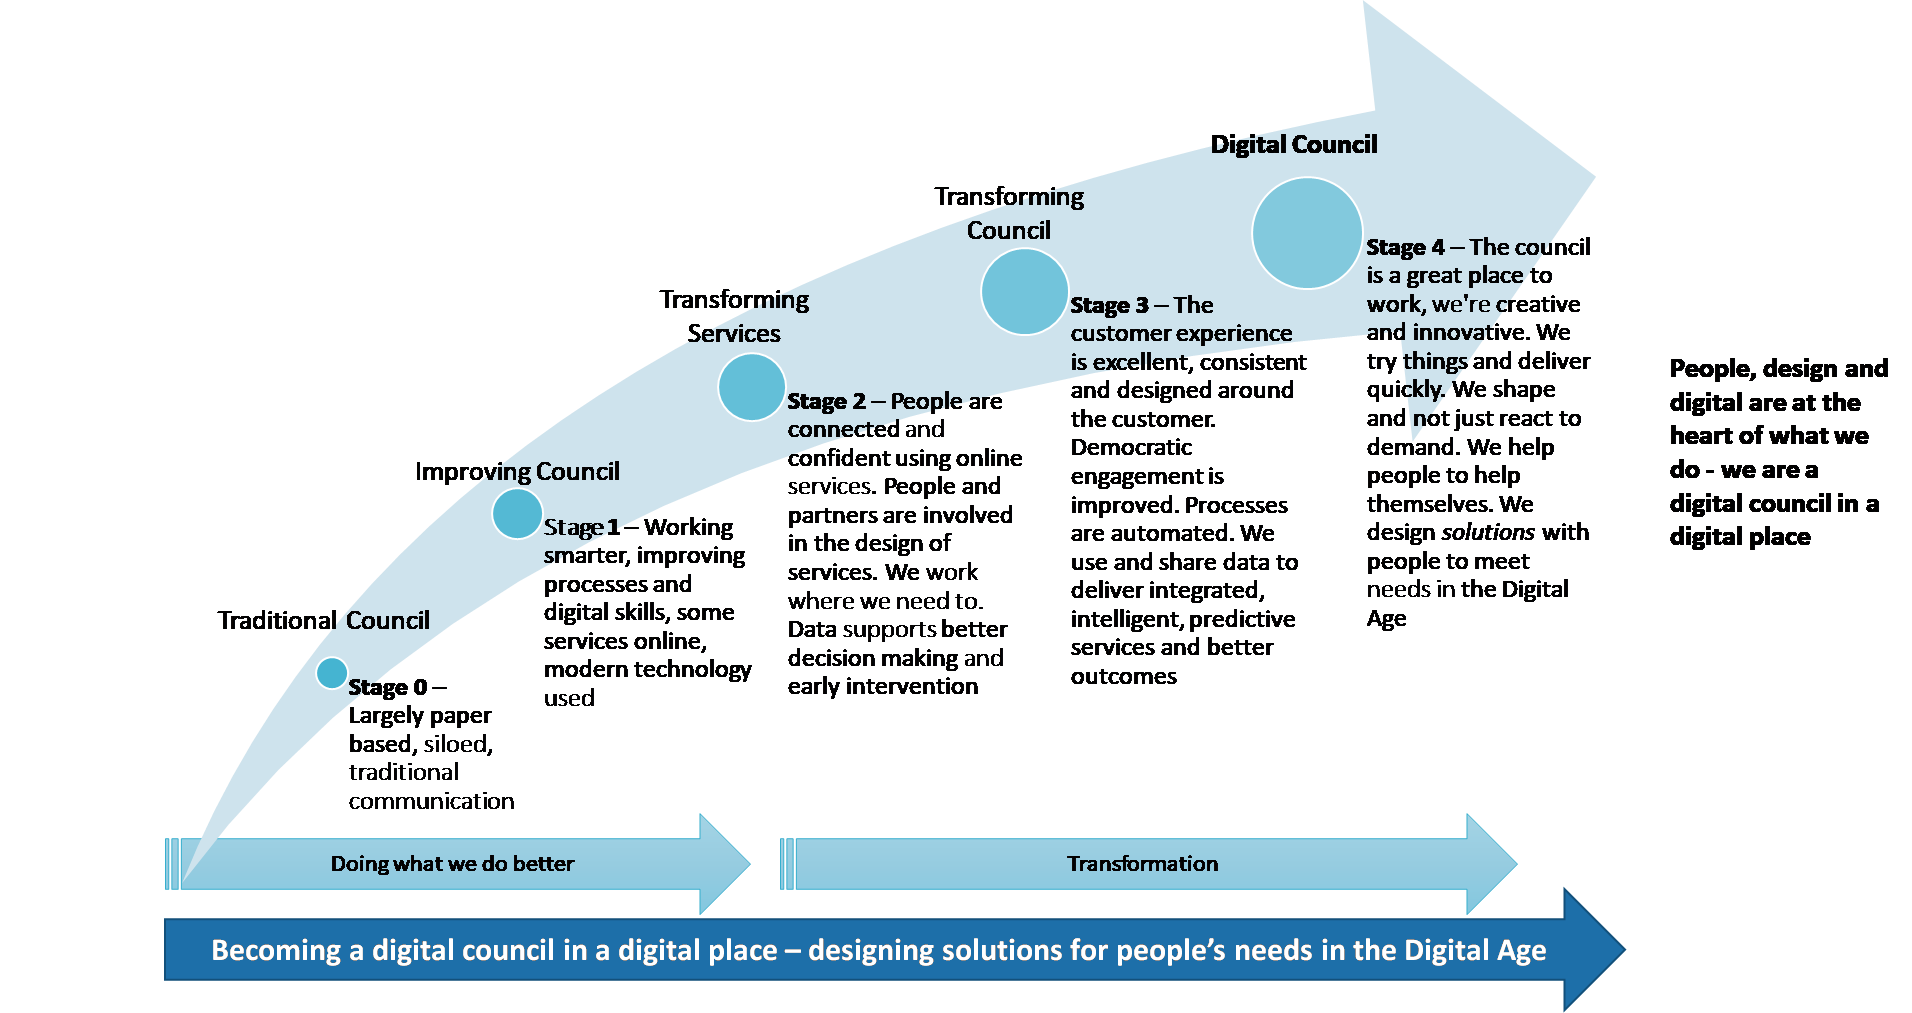 maturity curve: Stage 0 - traditional council; stage 1 - Improving council; Stage 2 - Transforming services; Stage 3 - Transforming council; Stage 4 - Digital council